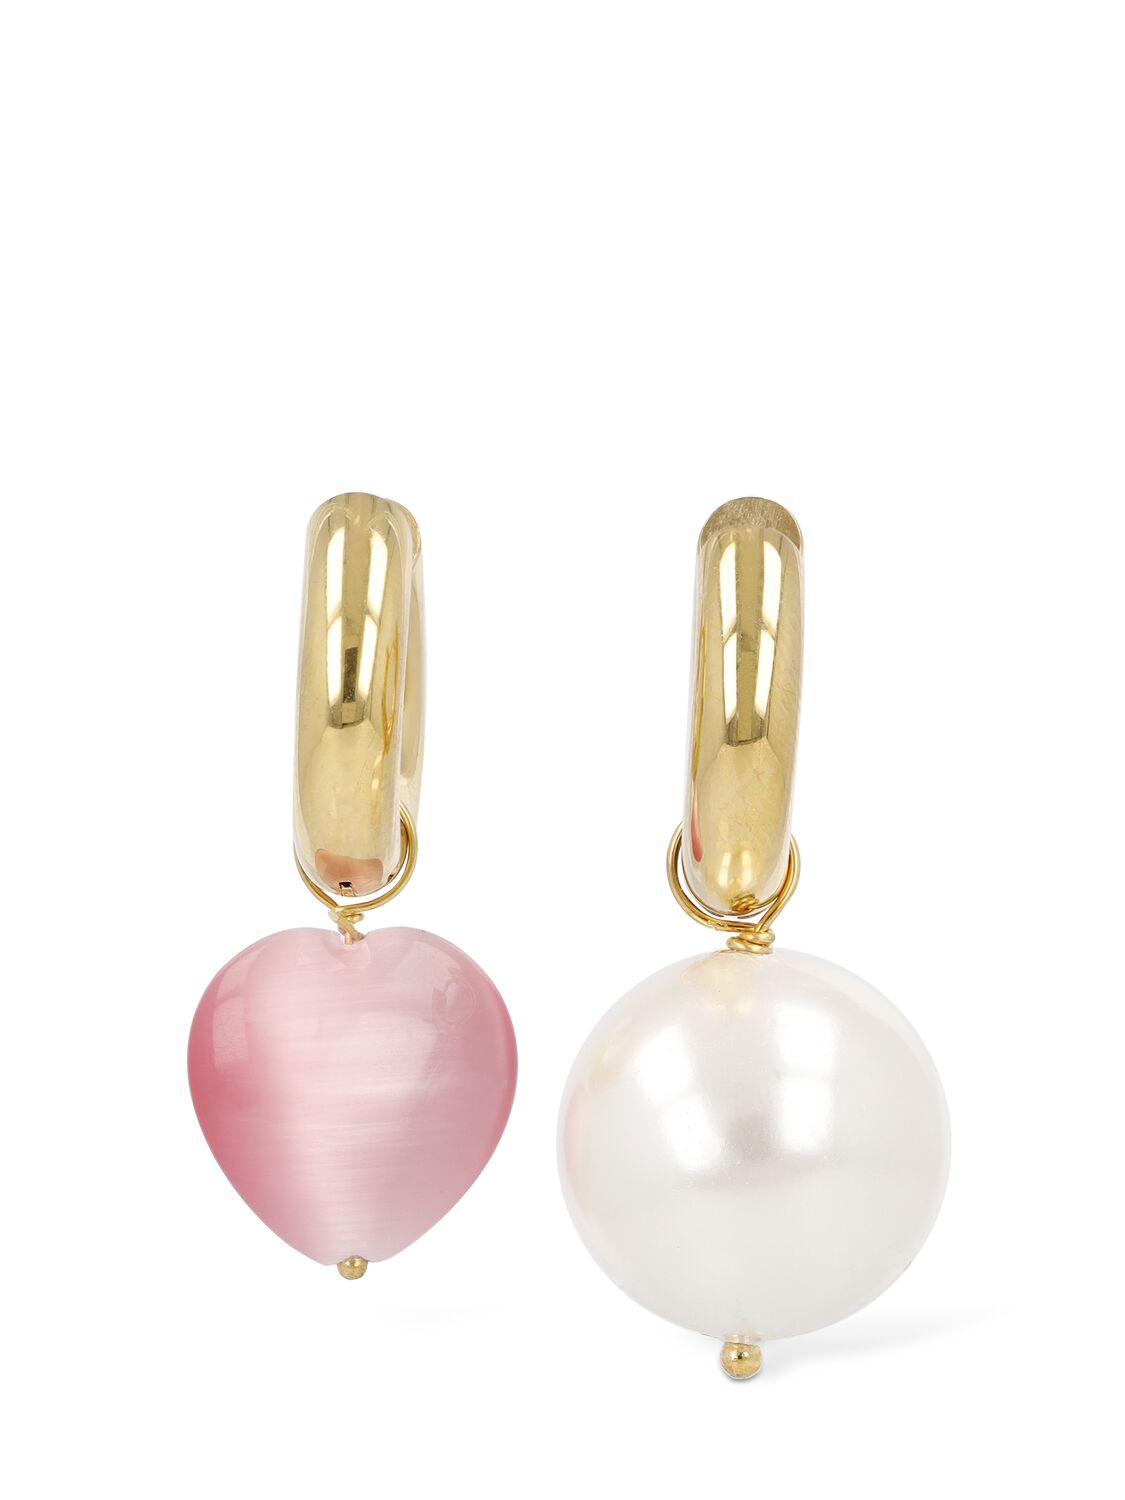 Image of Pearl & Heart Mismatched Earrings